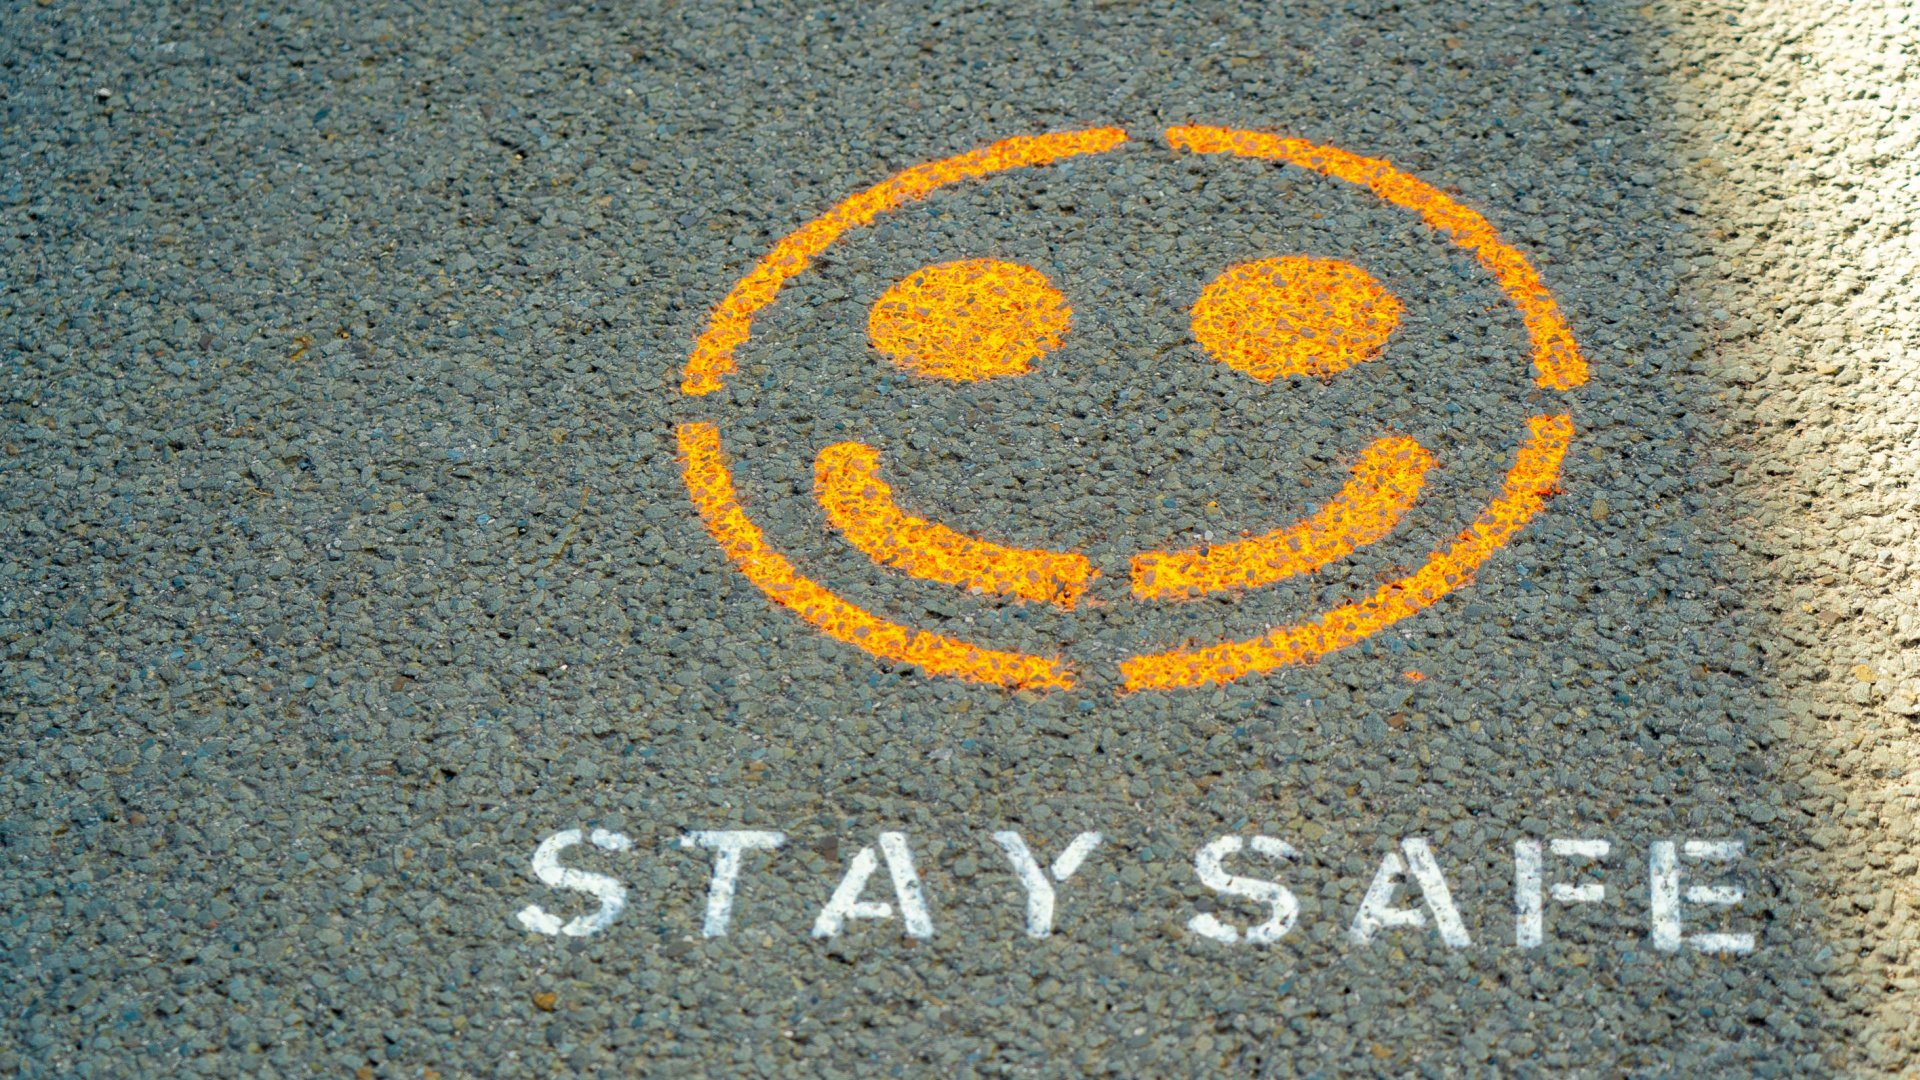 Painted sign on roadway that says Stay Safe